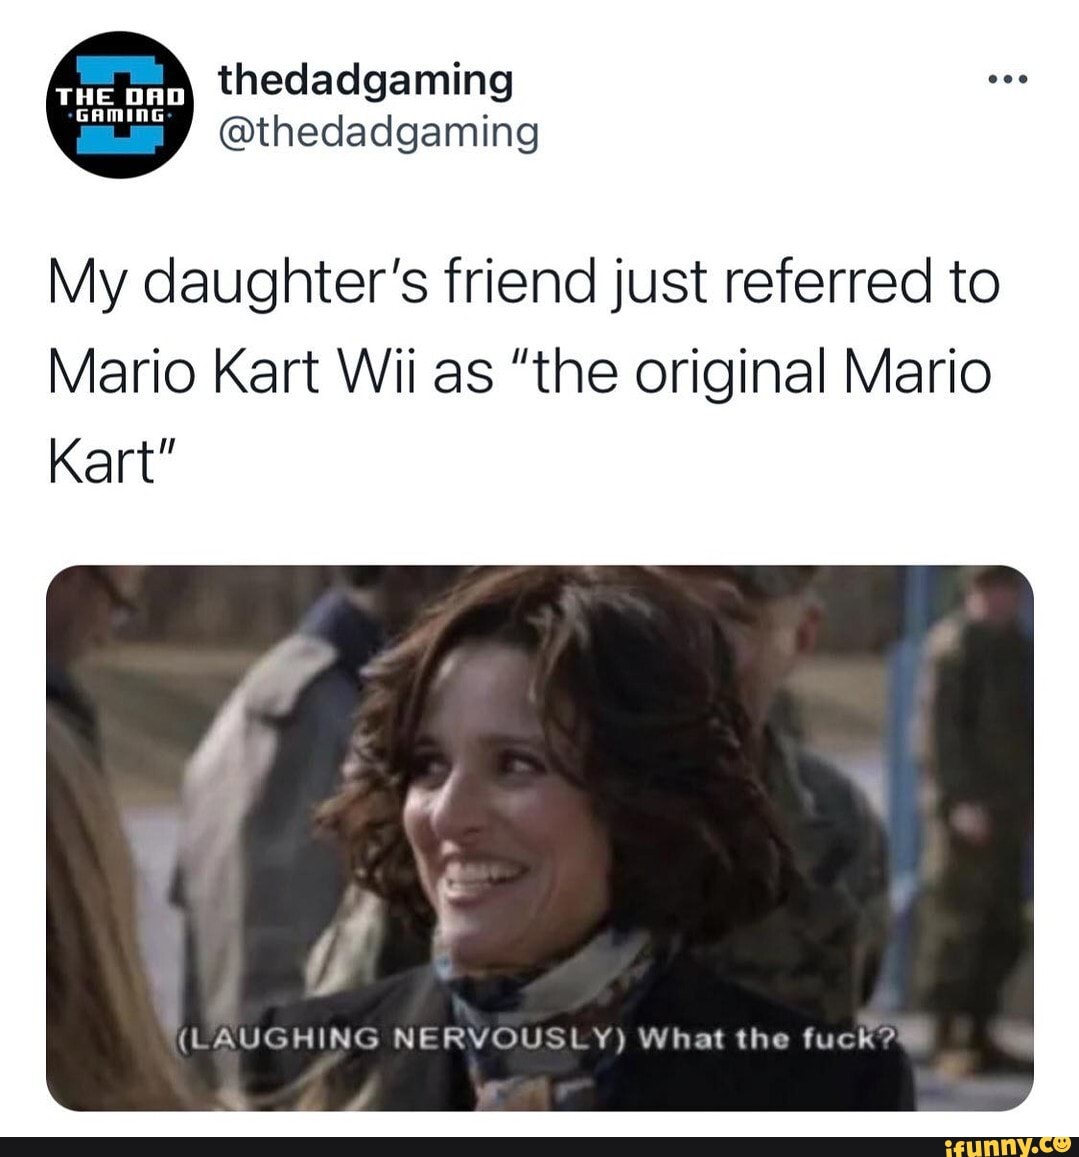 Oof The Dad Thedadgaming Thedadgaming My Daughters Friend Just Referred To Mario Kart Wii As 8051